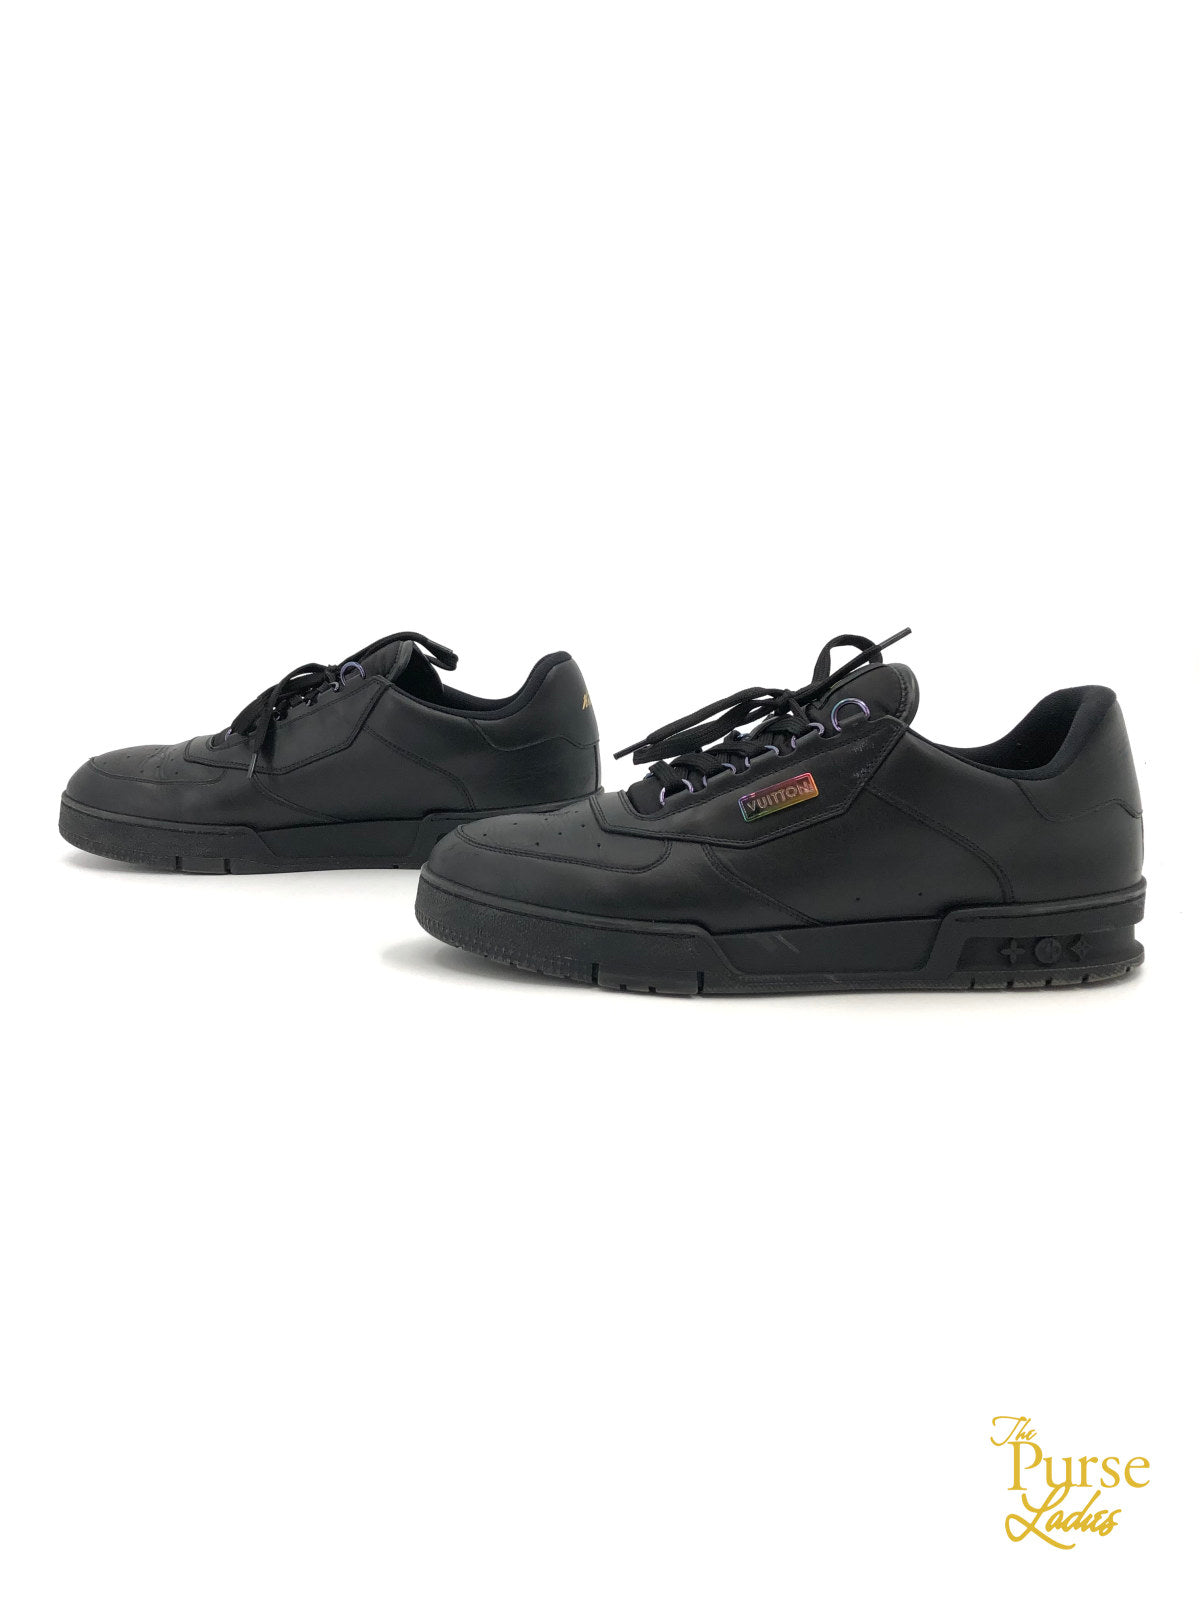 Leather trainers Louis Vuitton Black size 41.5 EU in Leather - 36510625